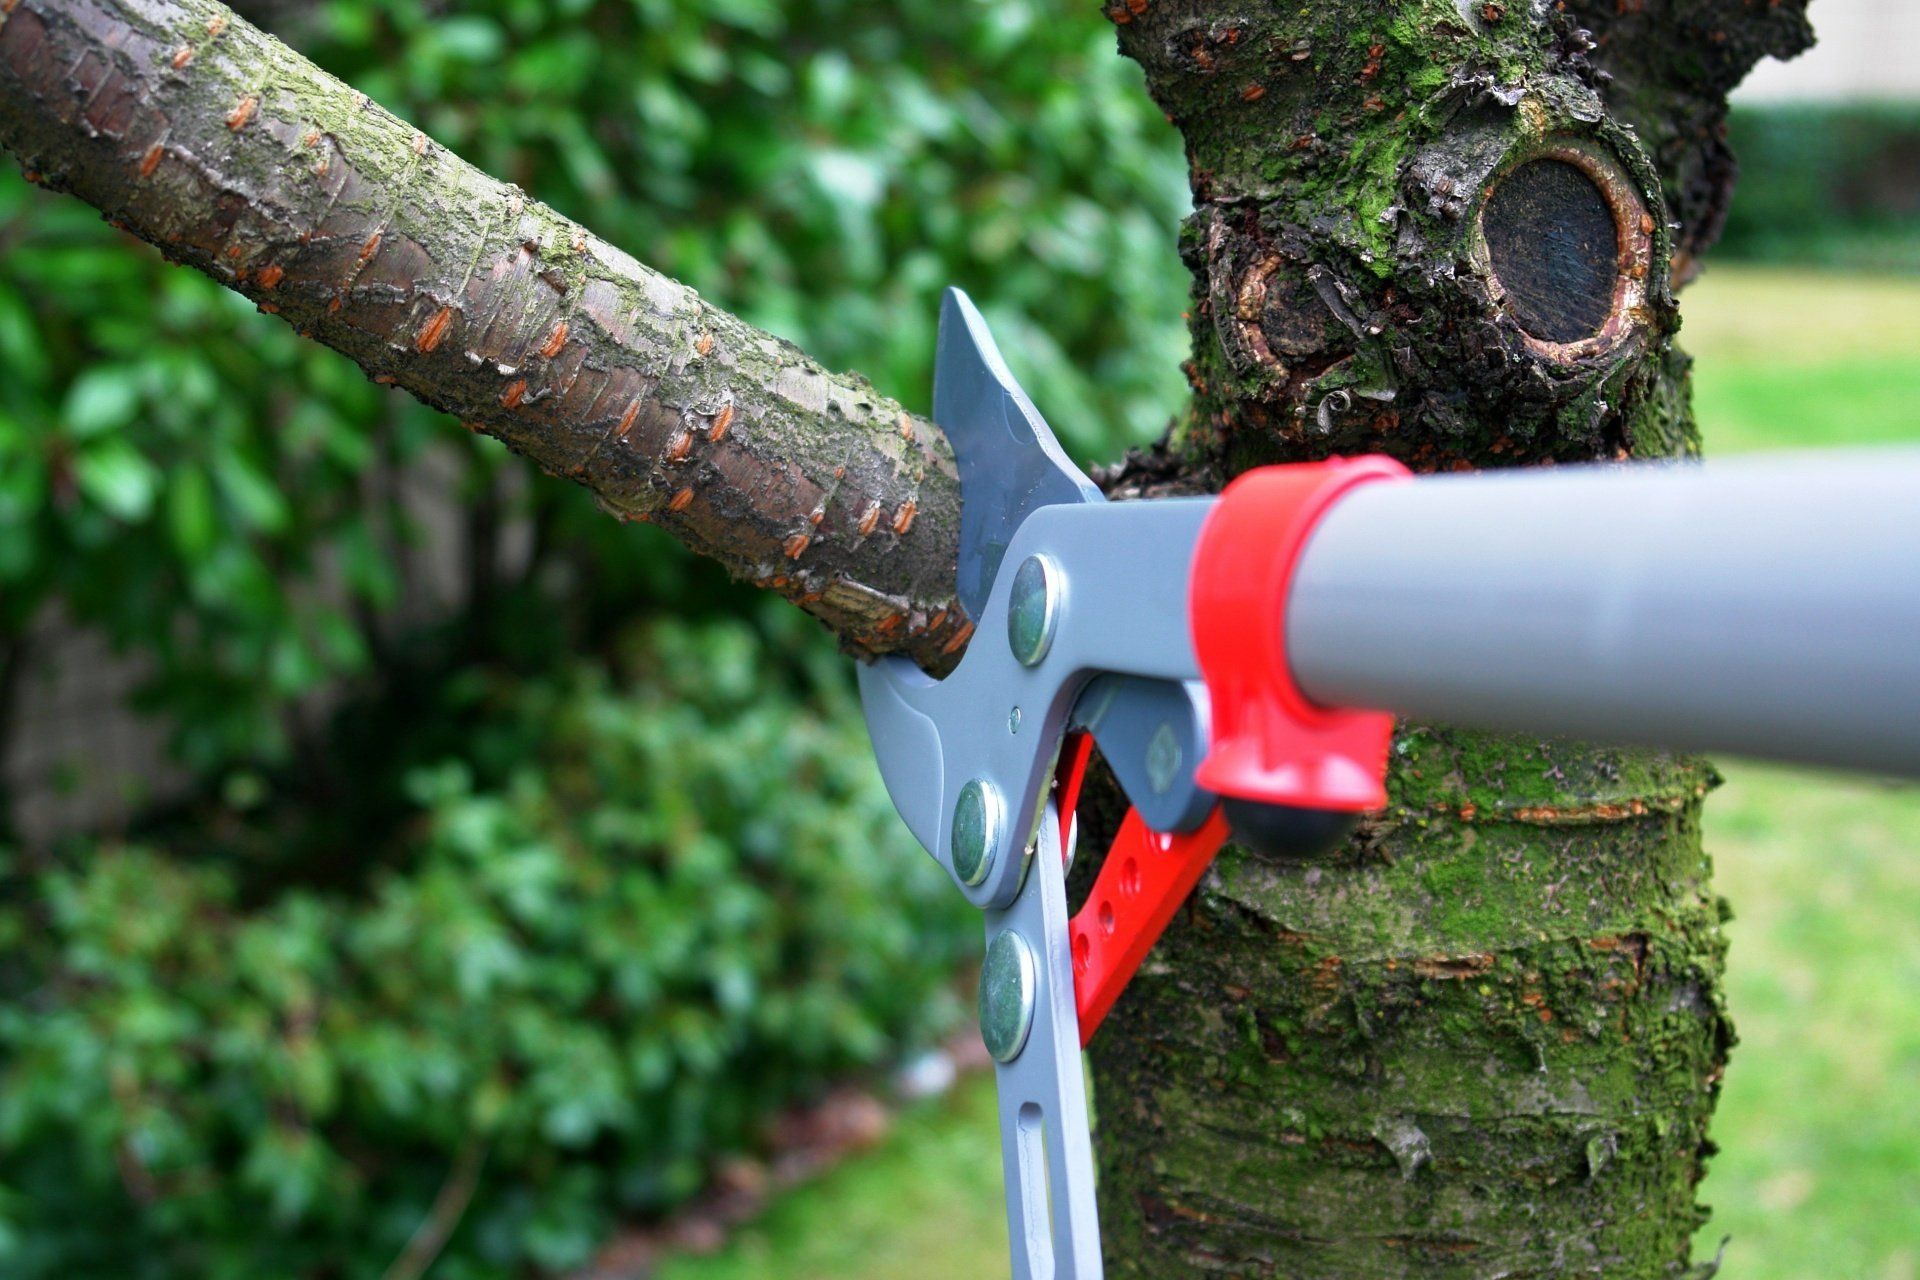 Person using pruning shears to trim branches on a tree.